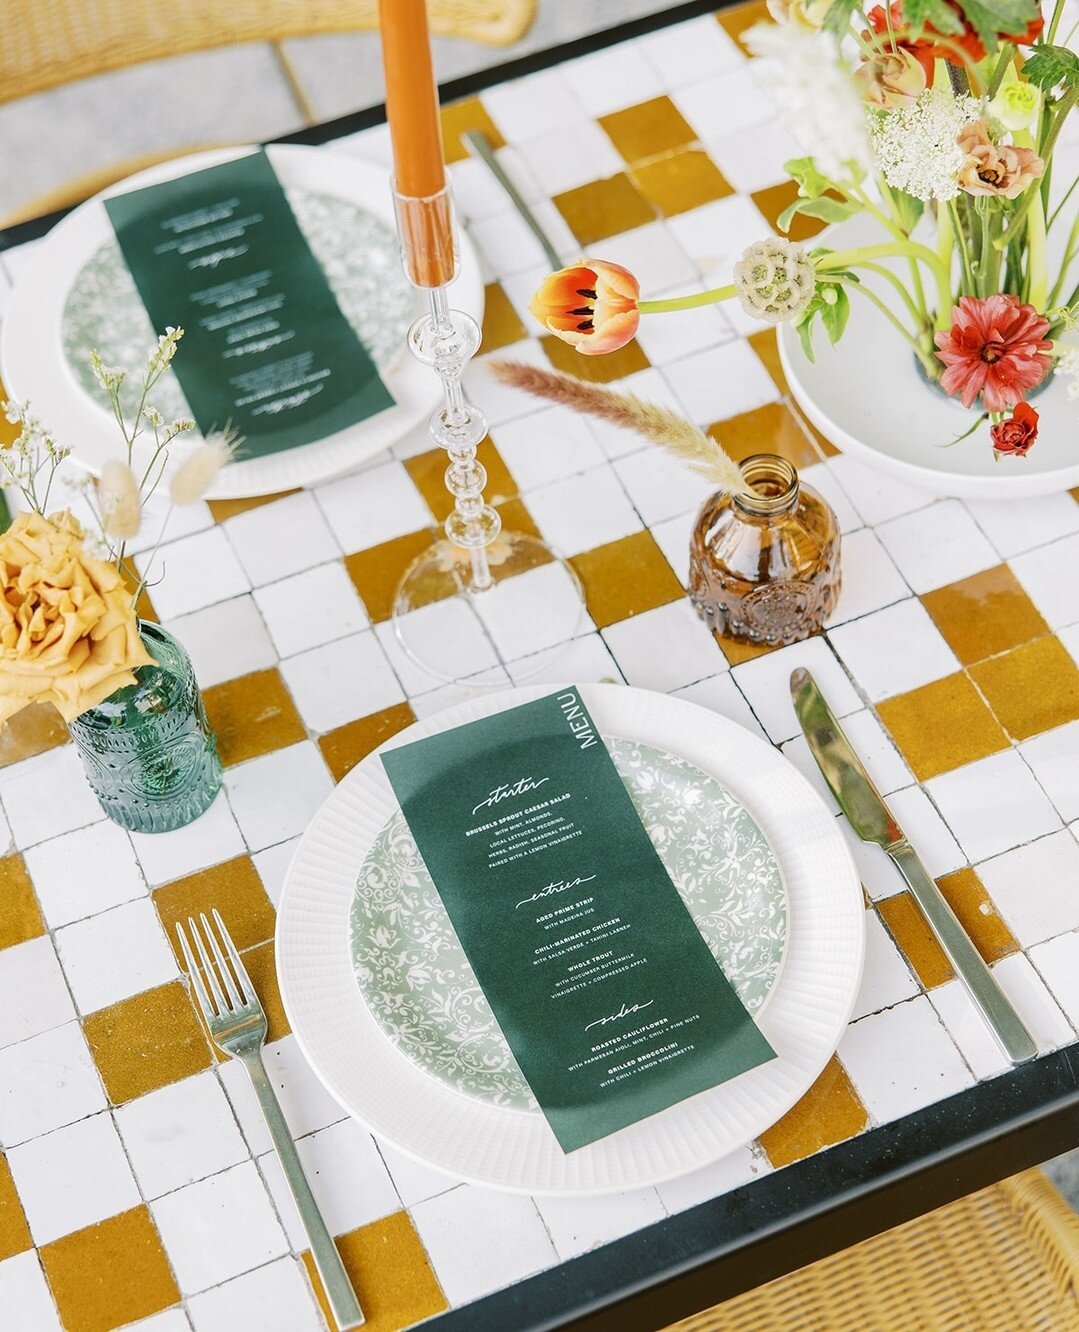 Everything about this tablescape is chef's kiss 🤌🏼 We love these playful + organic dancing stems paired with the moody tableware! ⁠
⁠
Venue &amp; Catering | @thesylvanhotel⁠
Photographer | @glorious.moments⁠
Florist | @missmillys⁠
Wedding Dress Bou